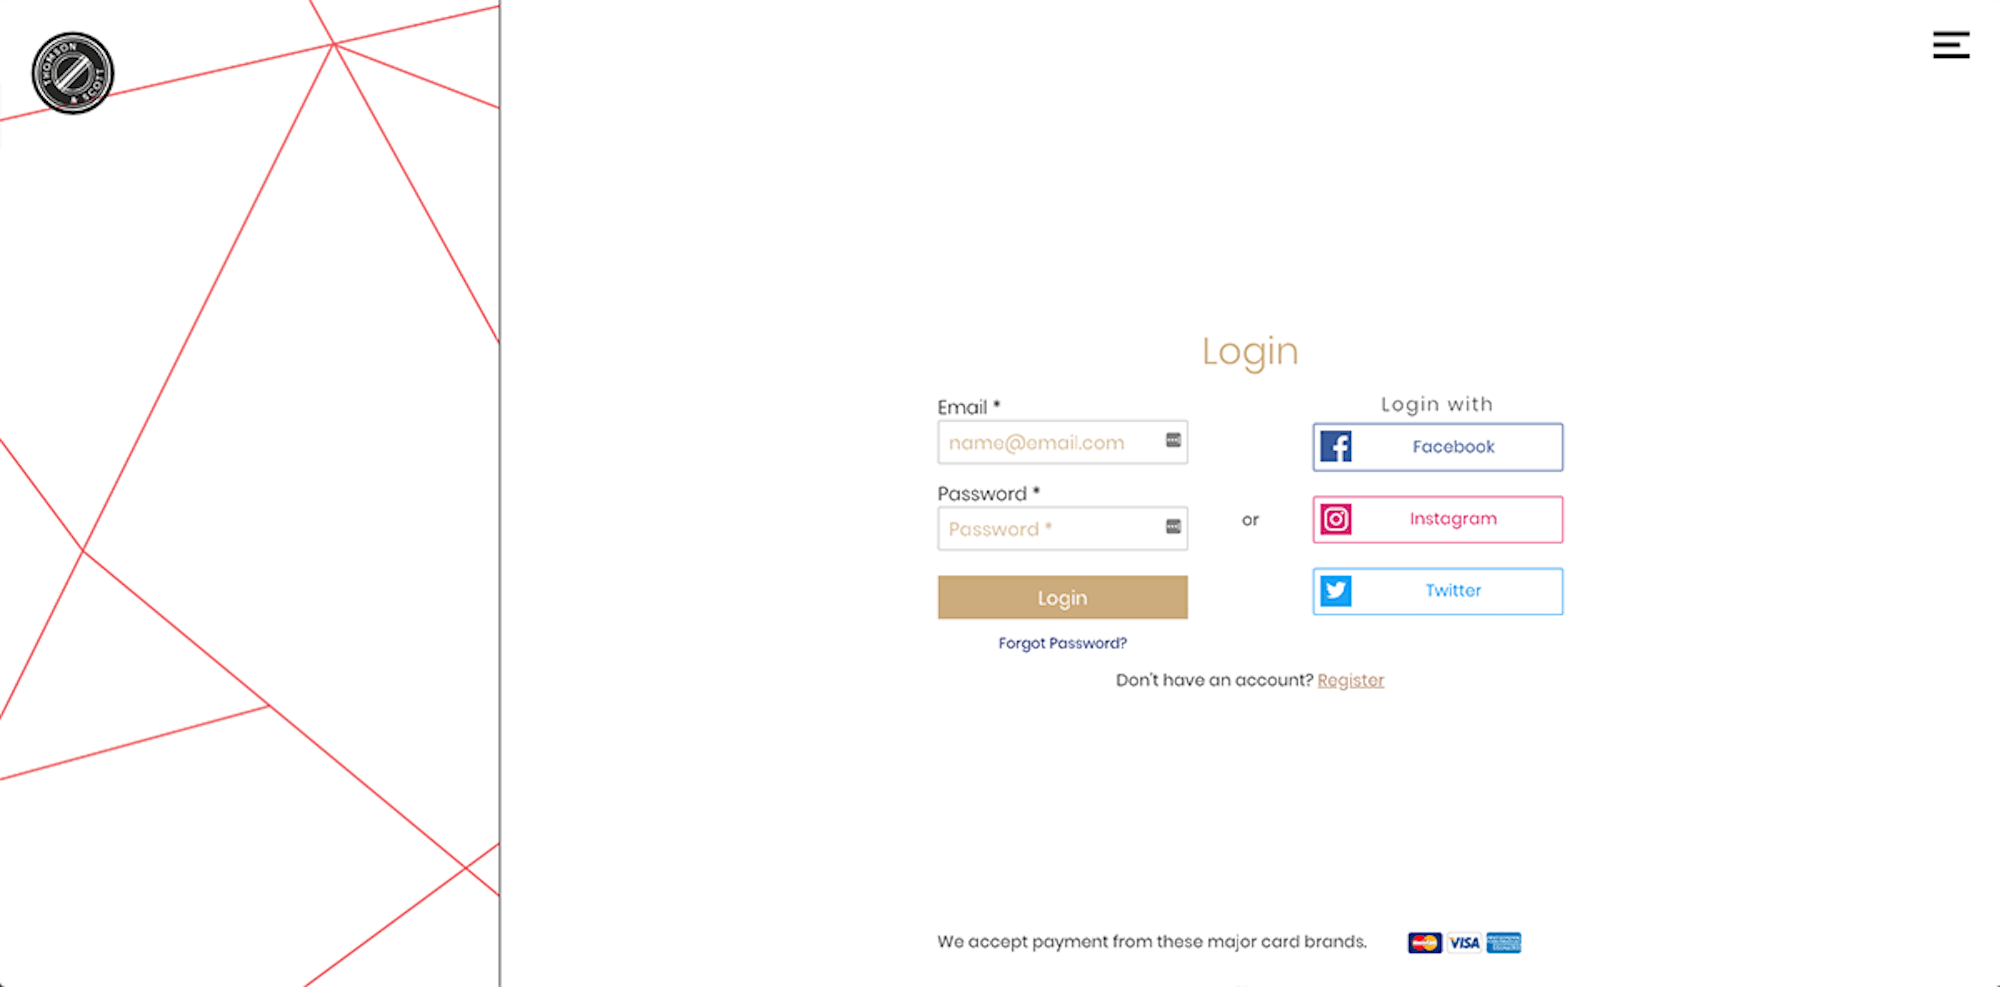 Thomson & Scott login page created using Laravel for authentication.